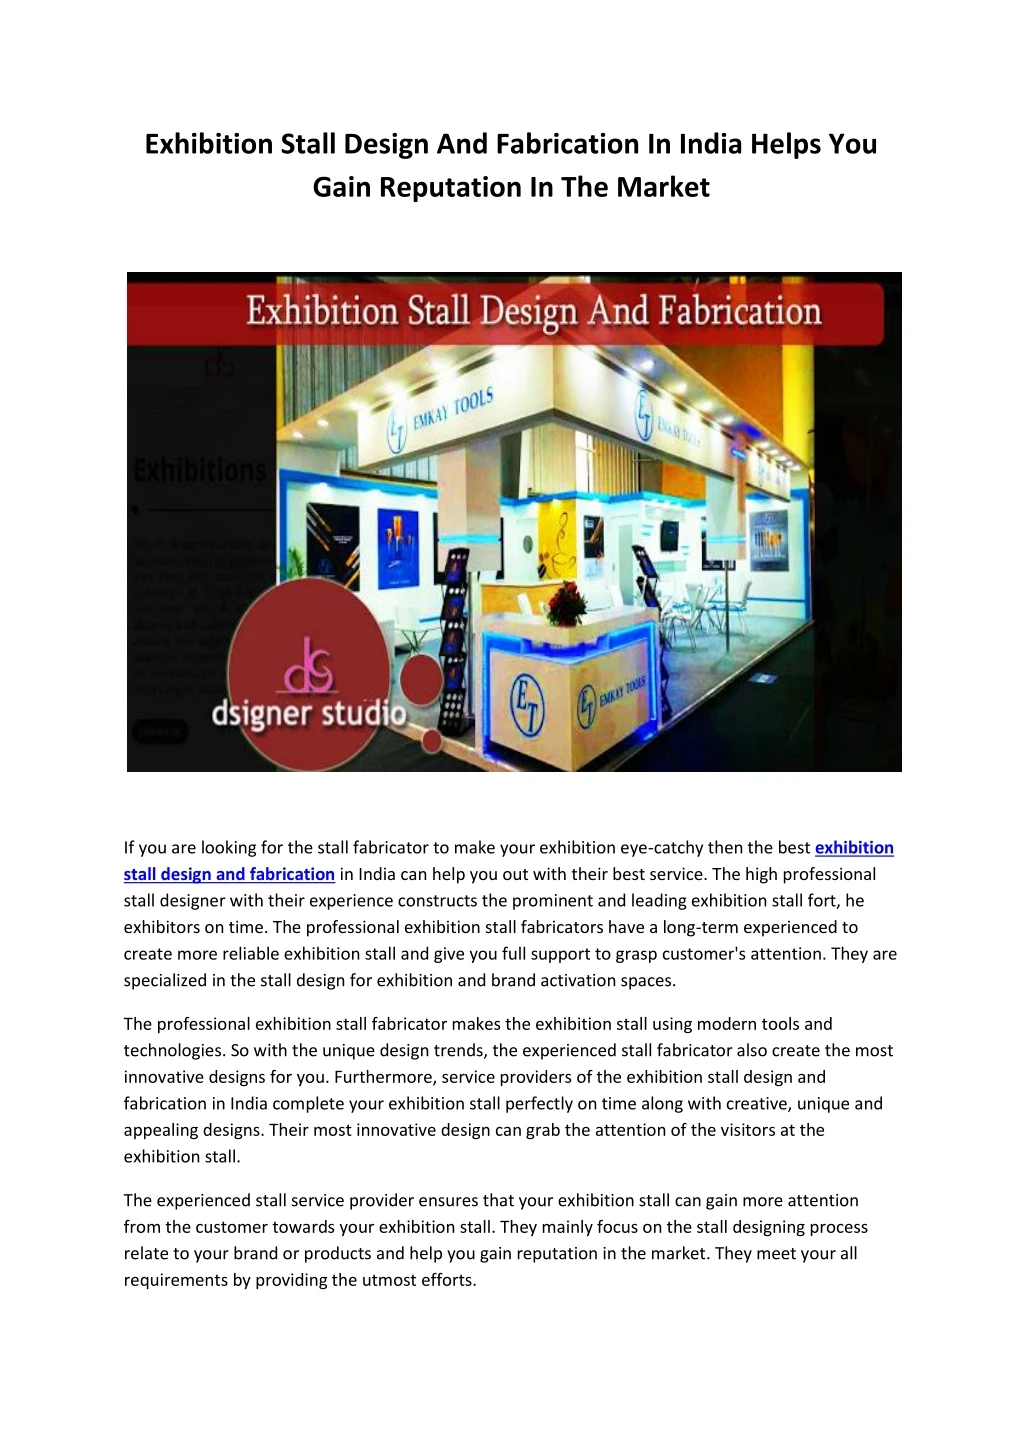 exhibition stall design and fabrication in india